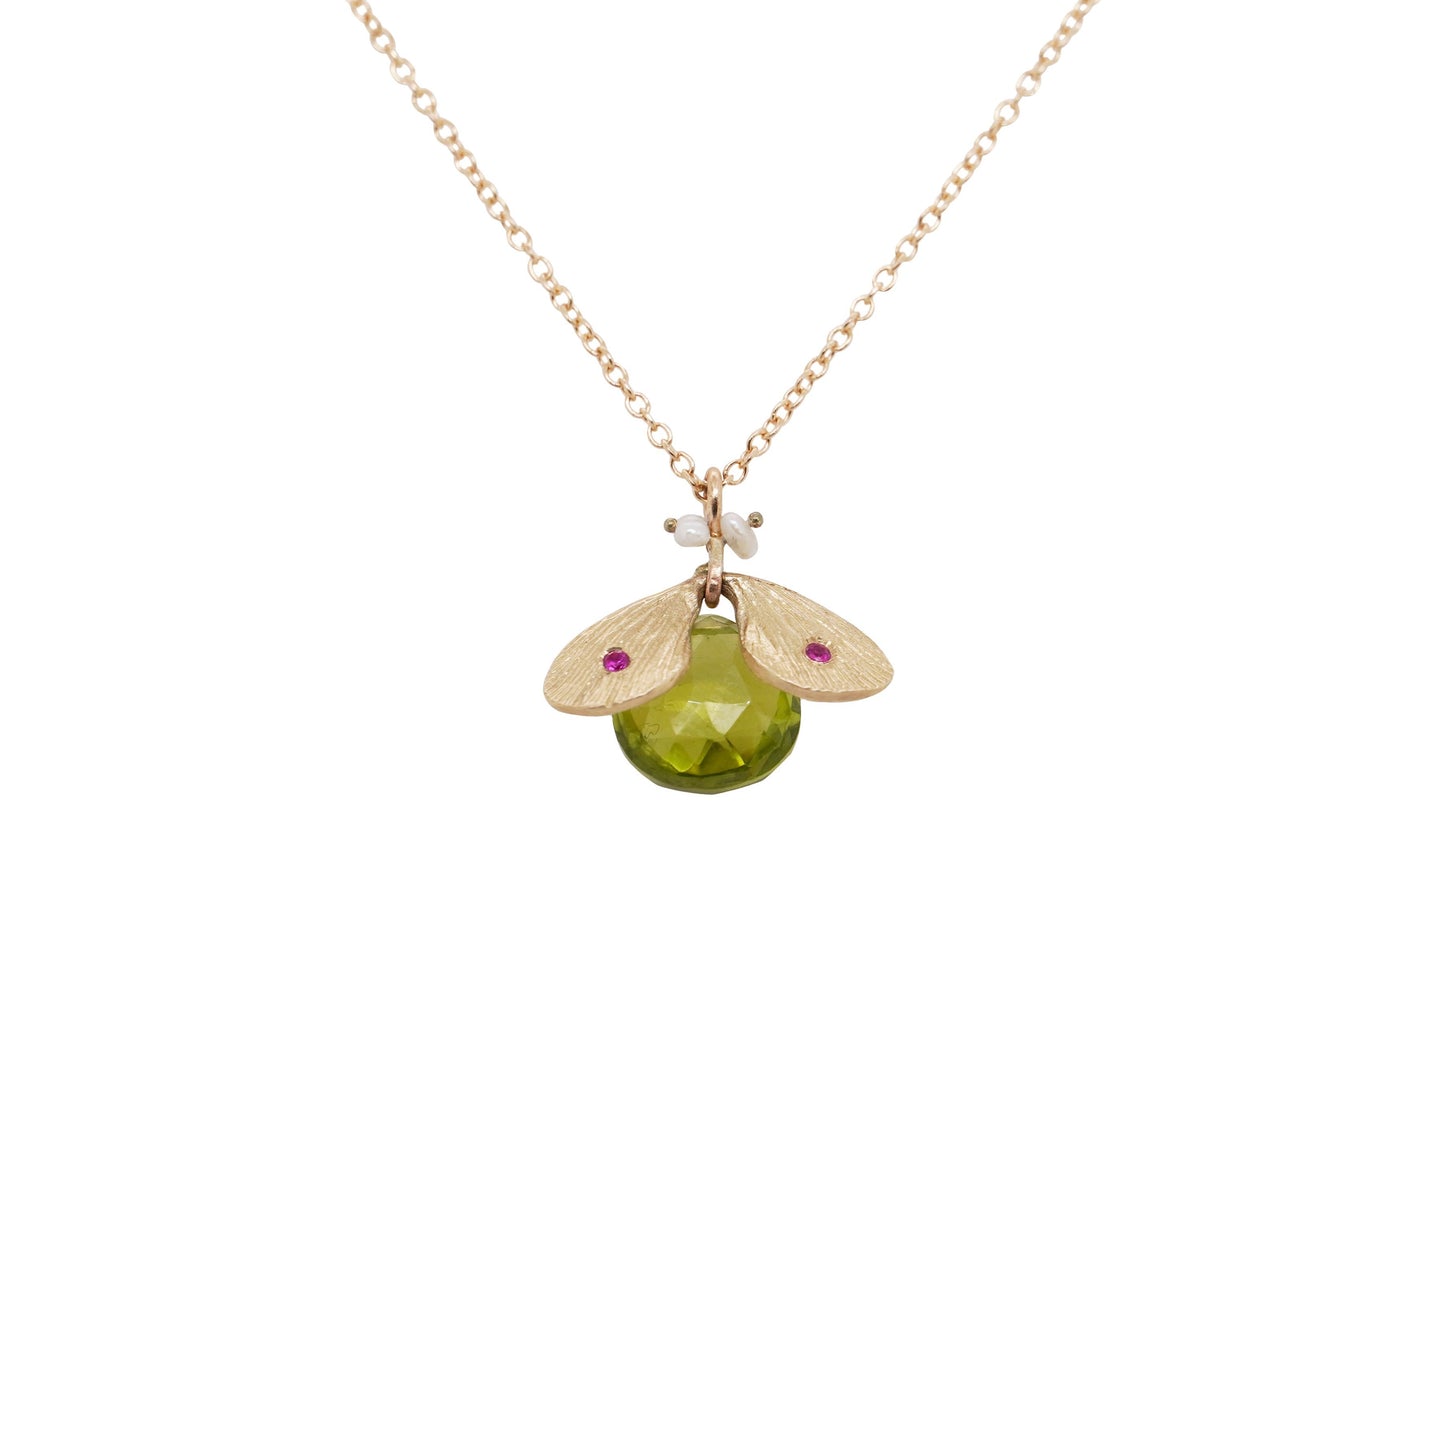 Peridot Bug Necklace with Rubies